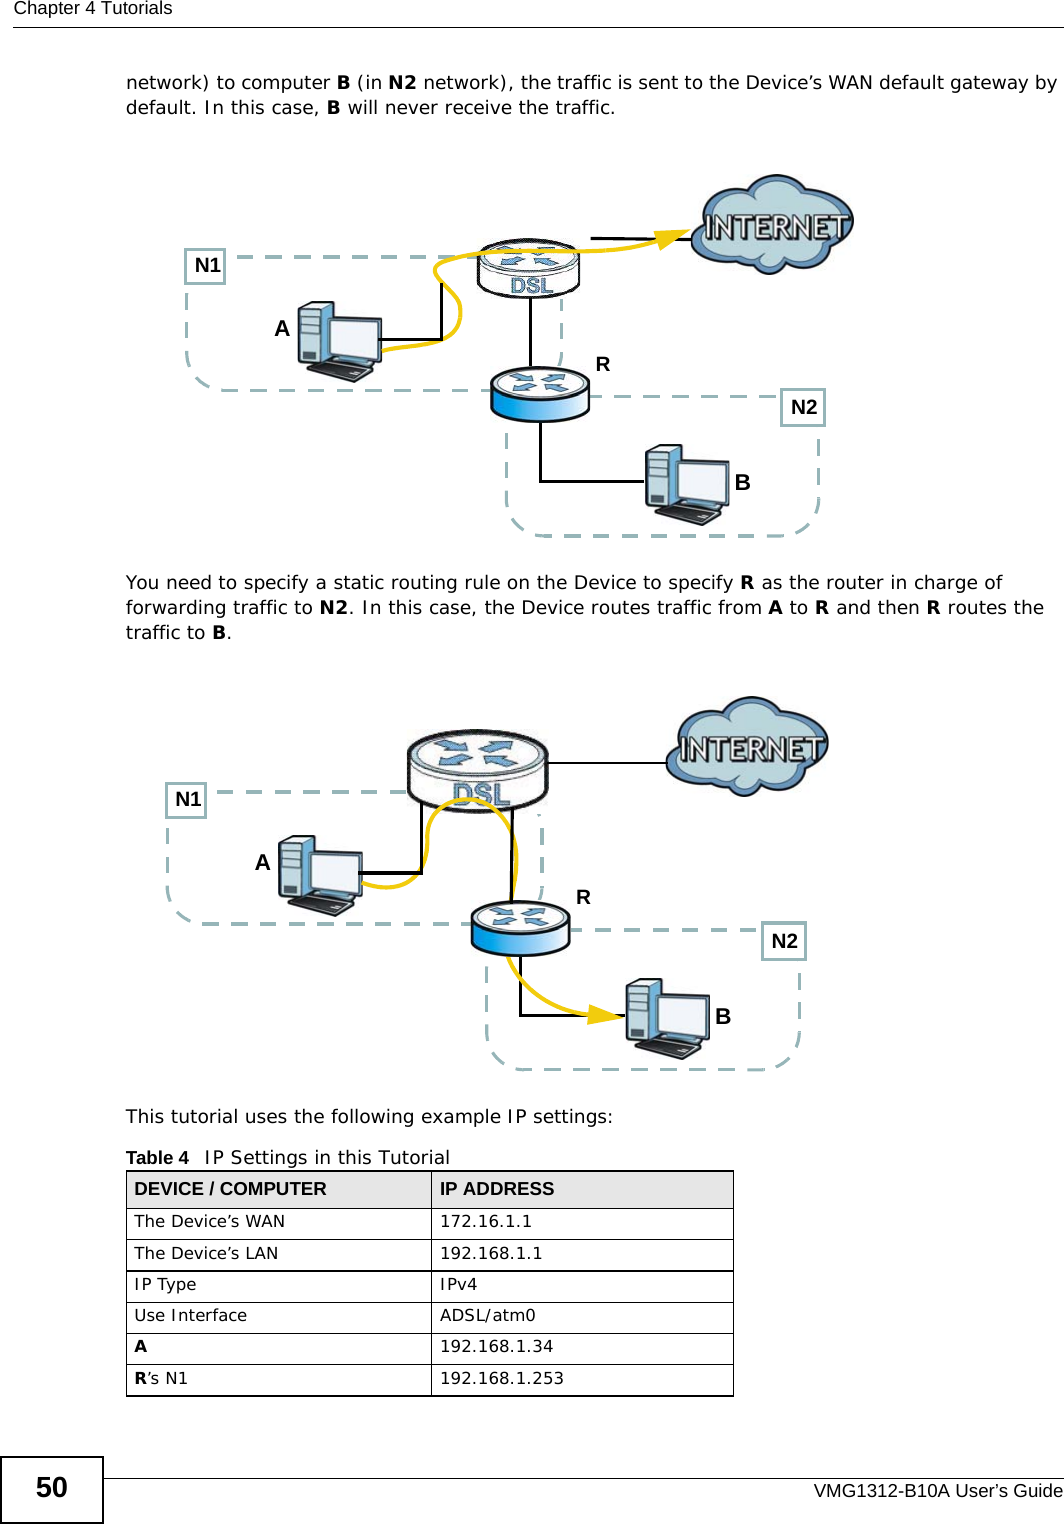 Chapter 4 TutorialsVMG1312-B10A User’s Guide50network) to computer B (in N2 network), the traffic is sent to the Device’s WAN default gateway by default. In this case, B will never receive the traffic.You need to specify a static routing rule on the Device to specify R as the router in charge of forwarding traffic to N2. In this case, the Device routes traffic from A to R and then R routes the traffic to B.This tutorial uses the following example IP settings:Table 4   IP Settings in this TutorialDEVICE / COMPUTER IP ADDRESSThe Device’s WAN 172.16.1.1The Device’s LAN 192.168.1.1IP Type IPv4Use Interface ADSL/atm0A192.168.1.34R’s N1  192.168.1.253N2BN1ARN2BN1AR